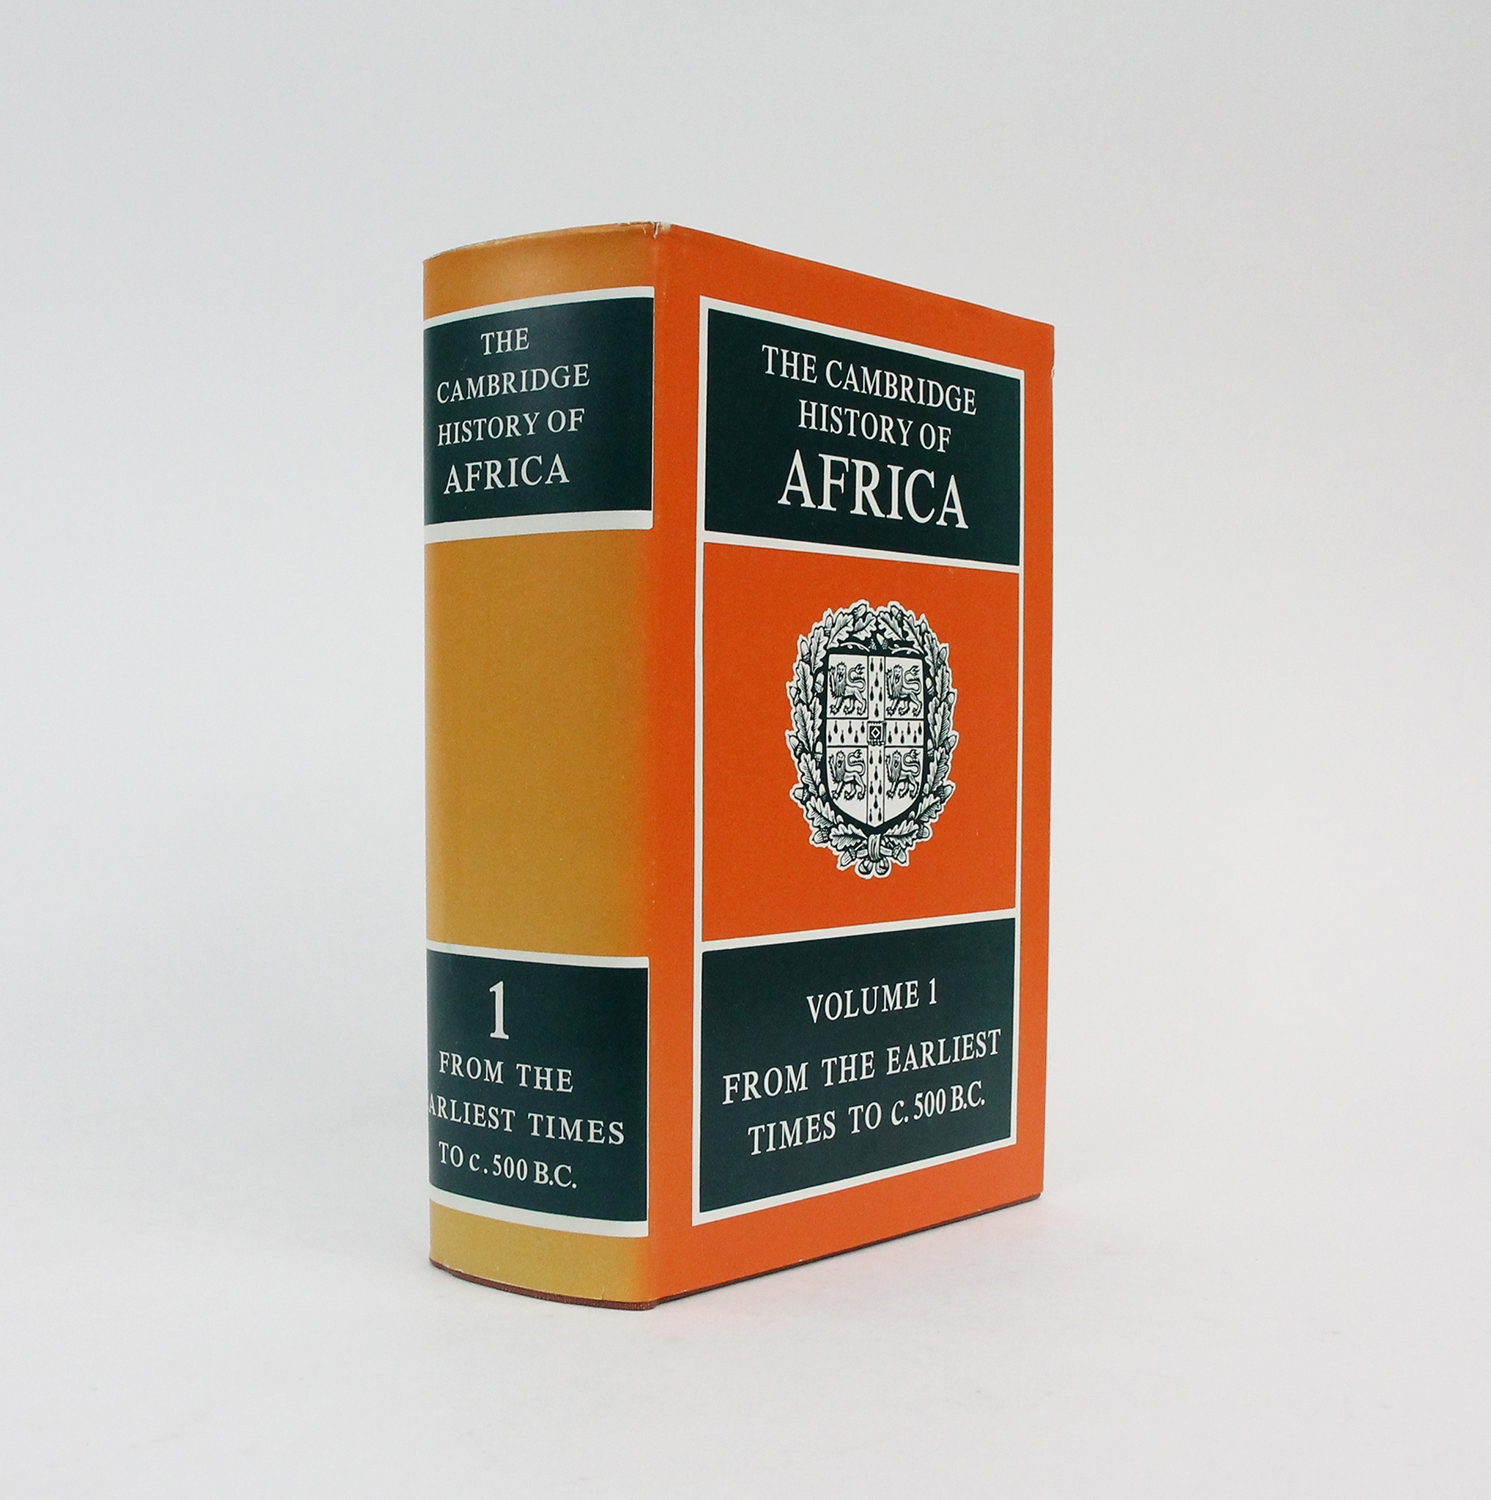 THE CAMBRIDGE HISTORY OF AFRICA. VOLUME 1: From the Earliest Times to c. 500 B.C. - CLARK, J. Desmond